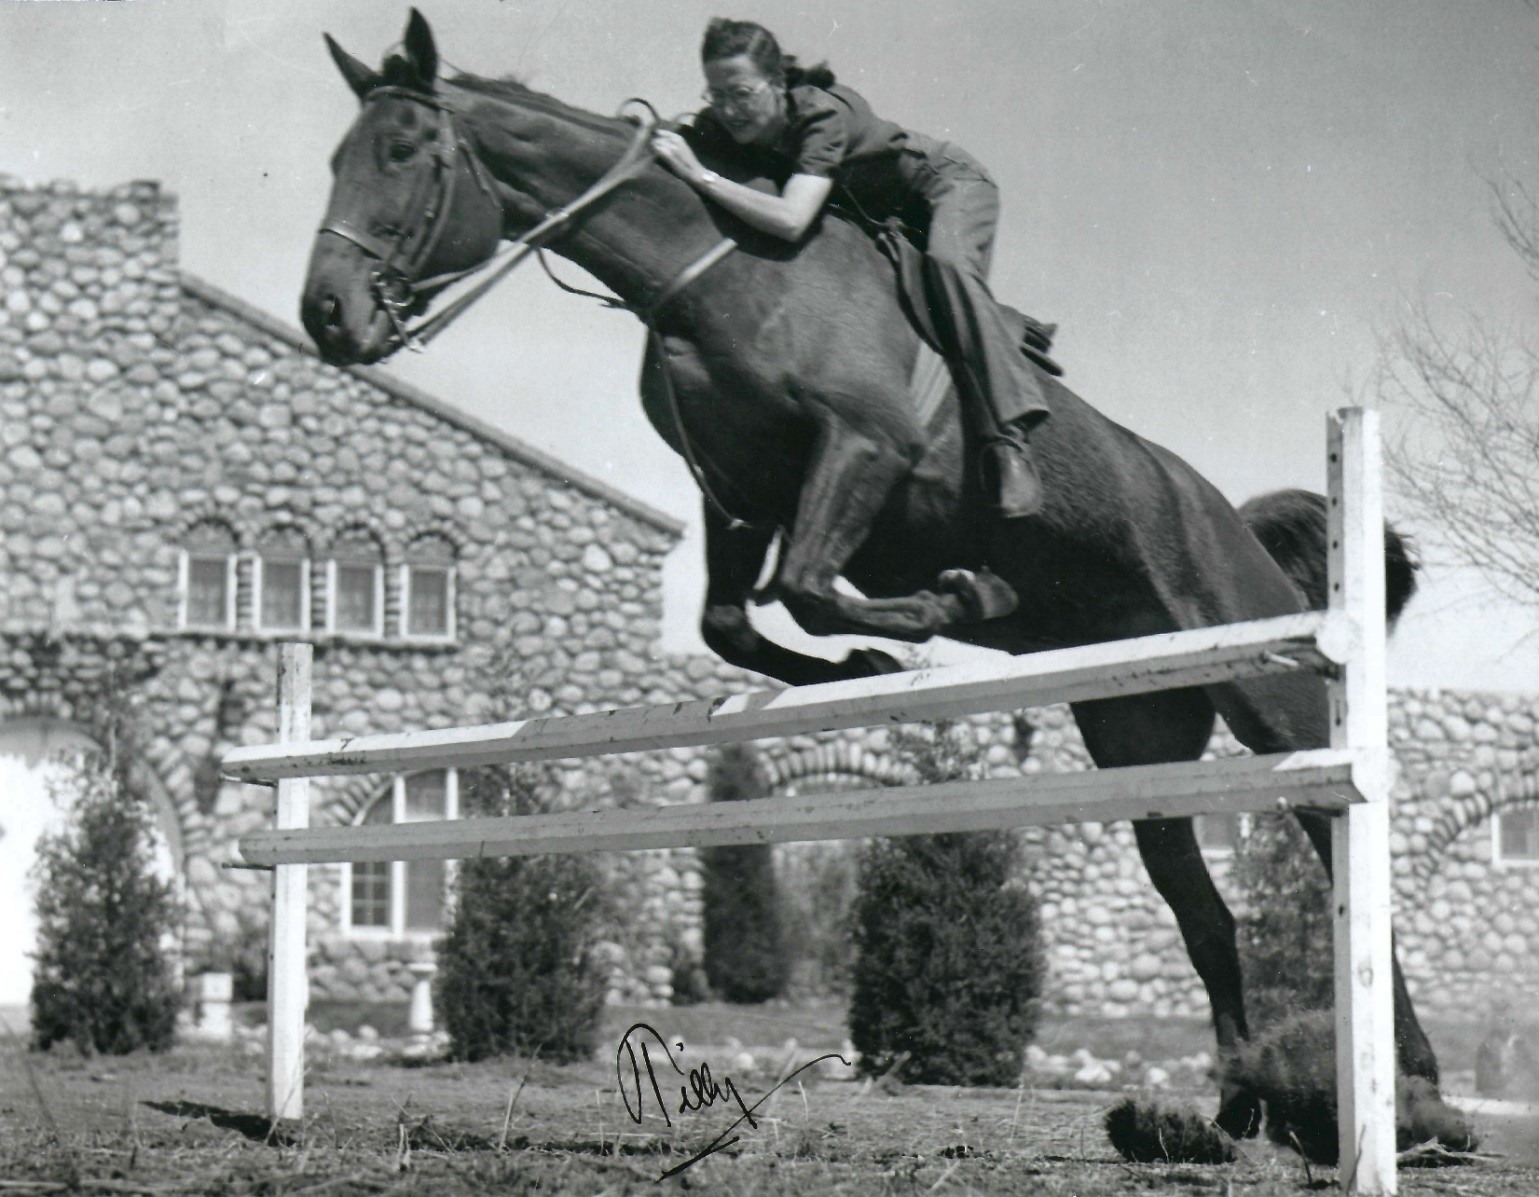 A woman on a horse leaping a low barrier. A stable is visible behind them.